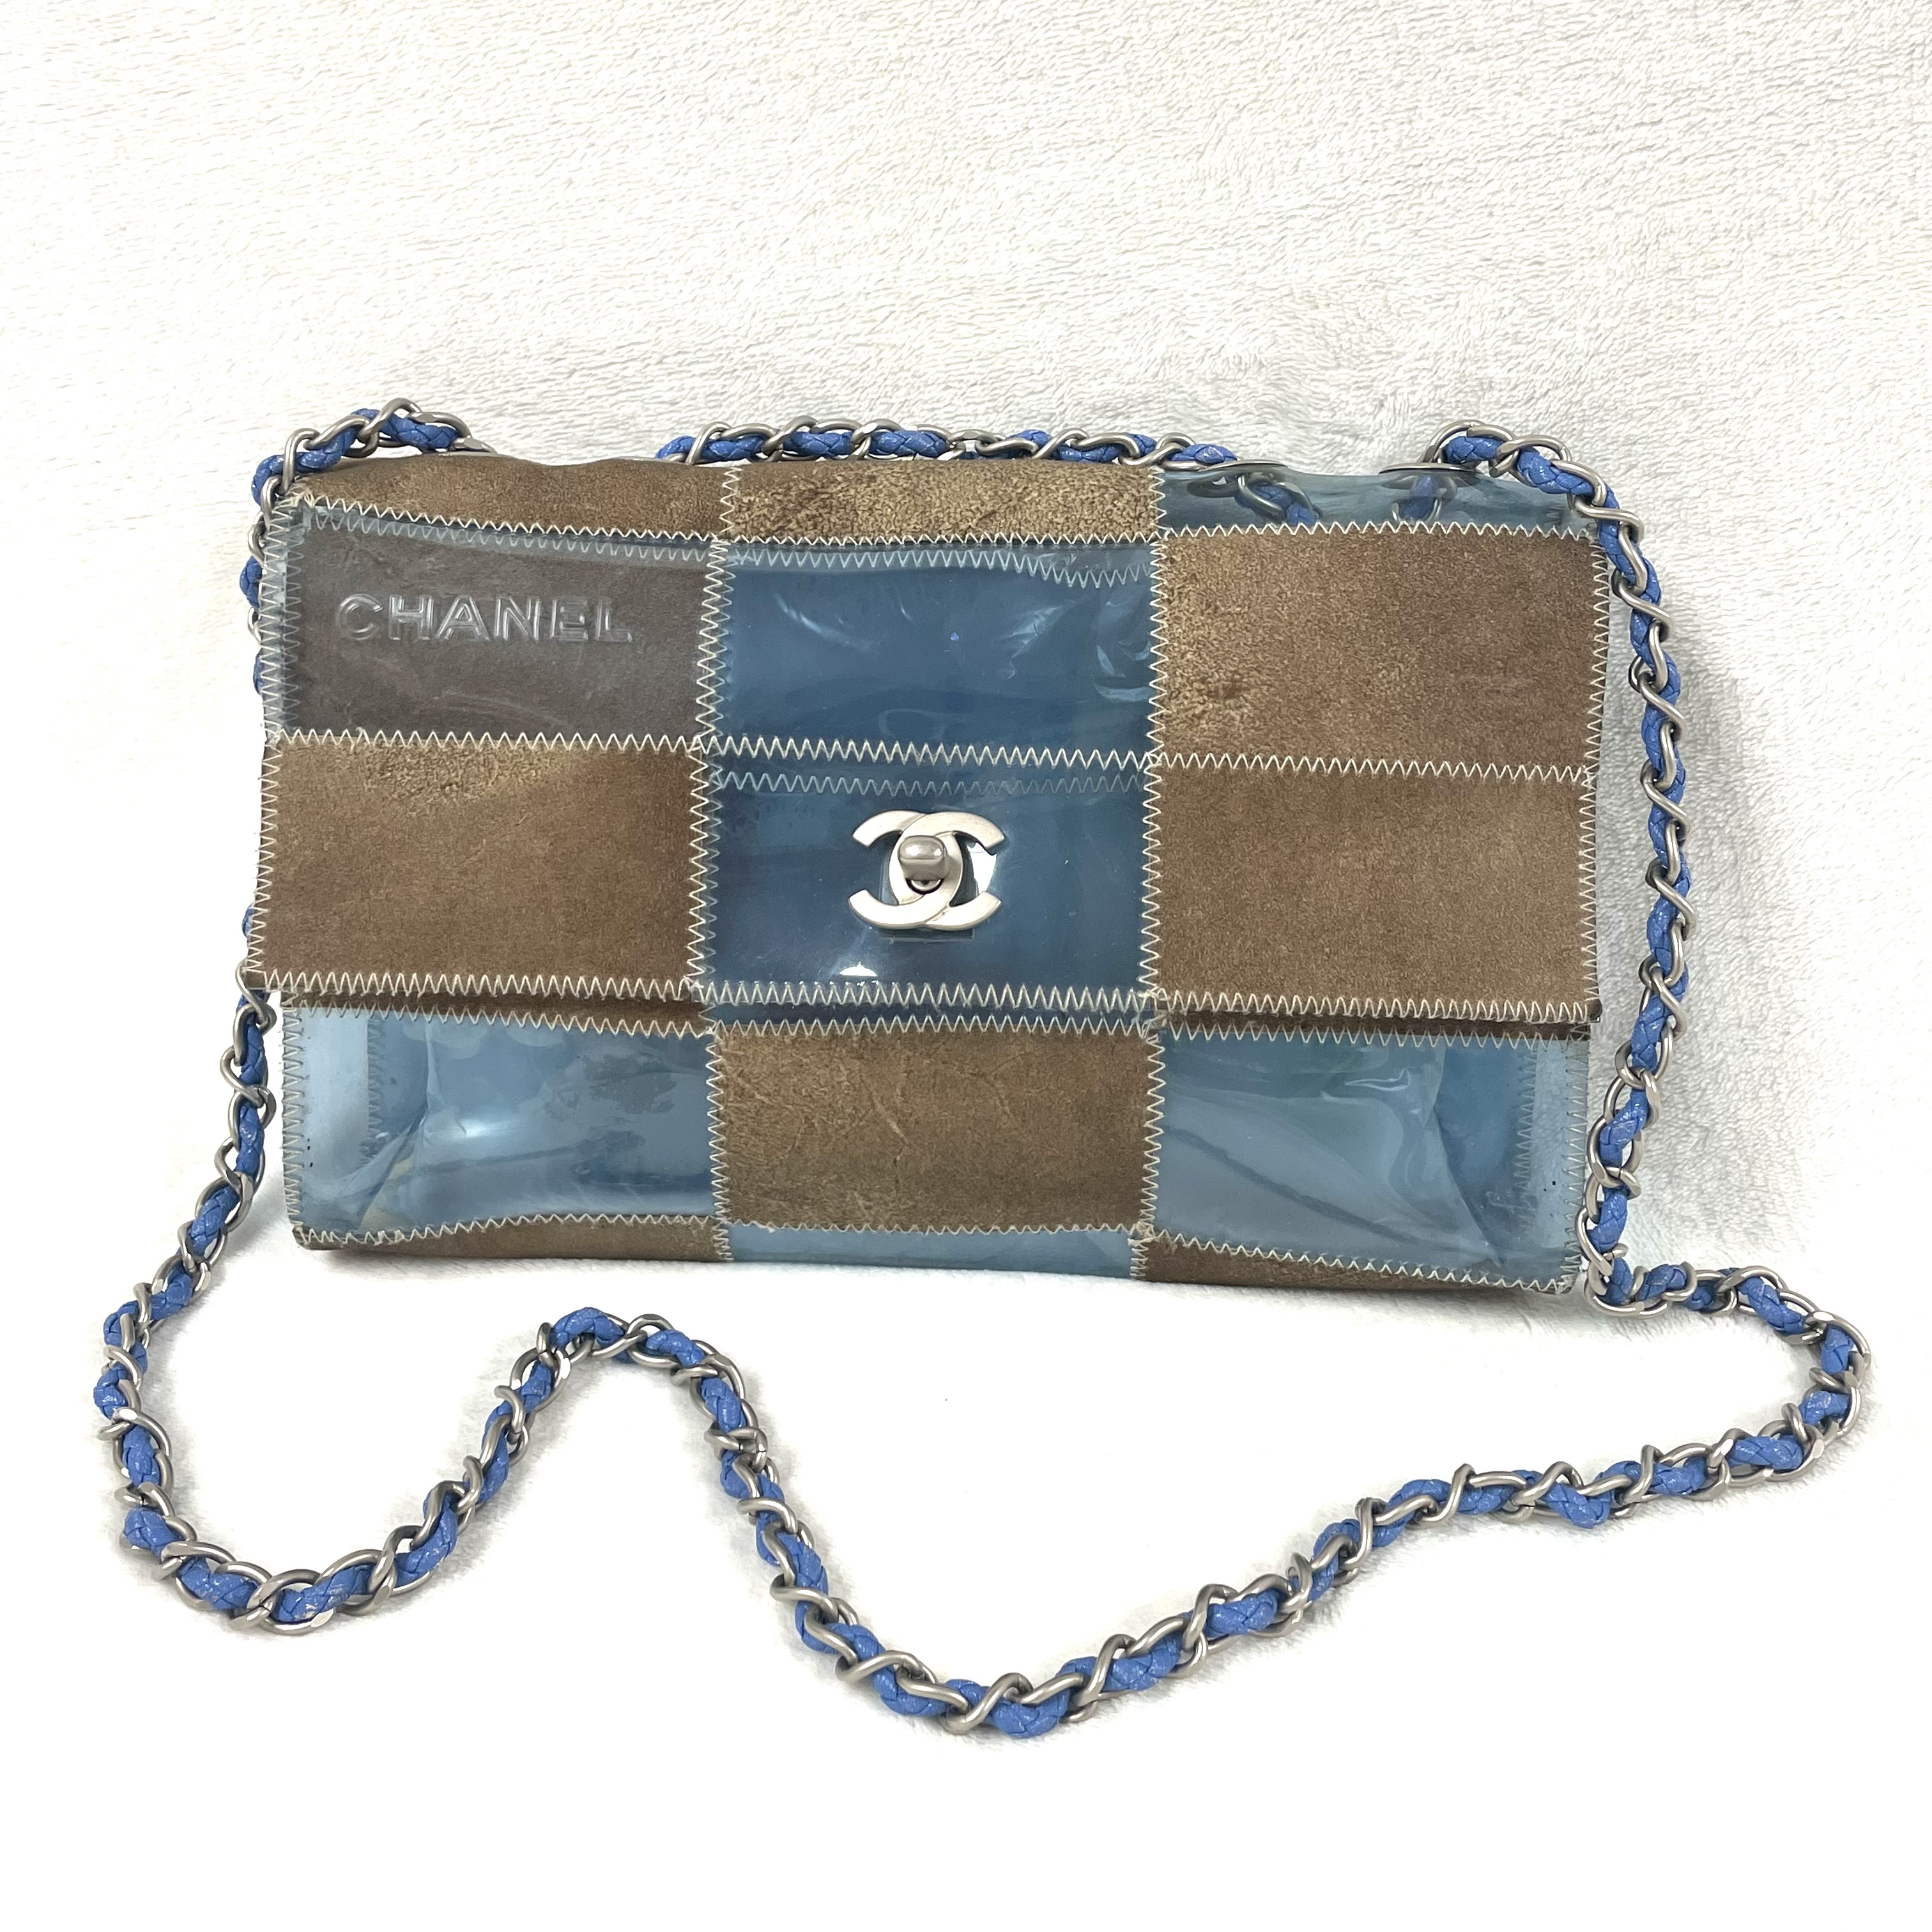 CHANEL, Bags, Chanel Limited Edition Colorama Watercolor Quilted Canvas  Single Flap Bag